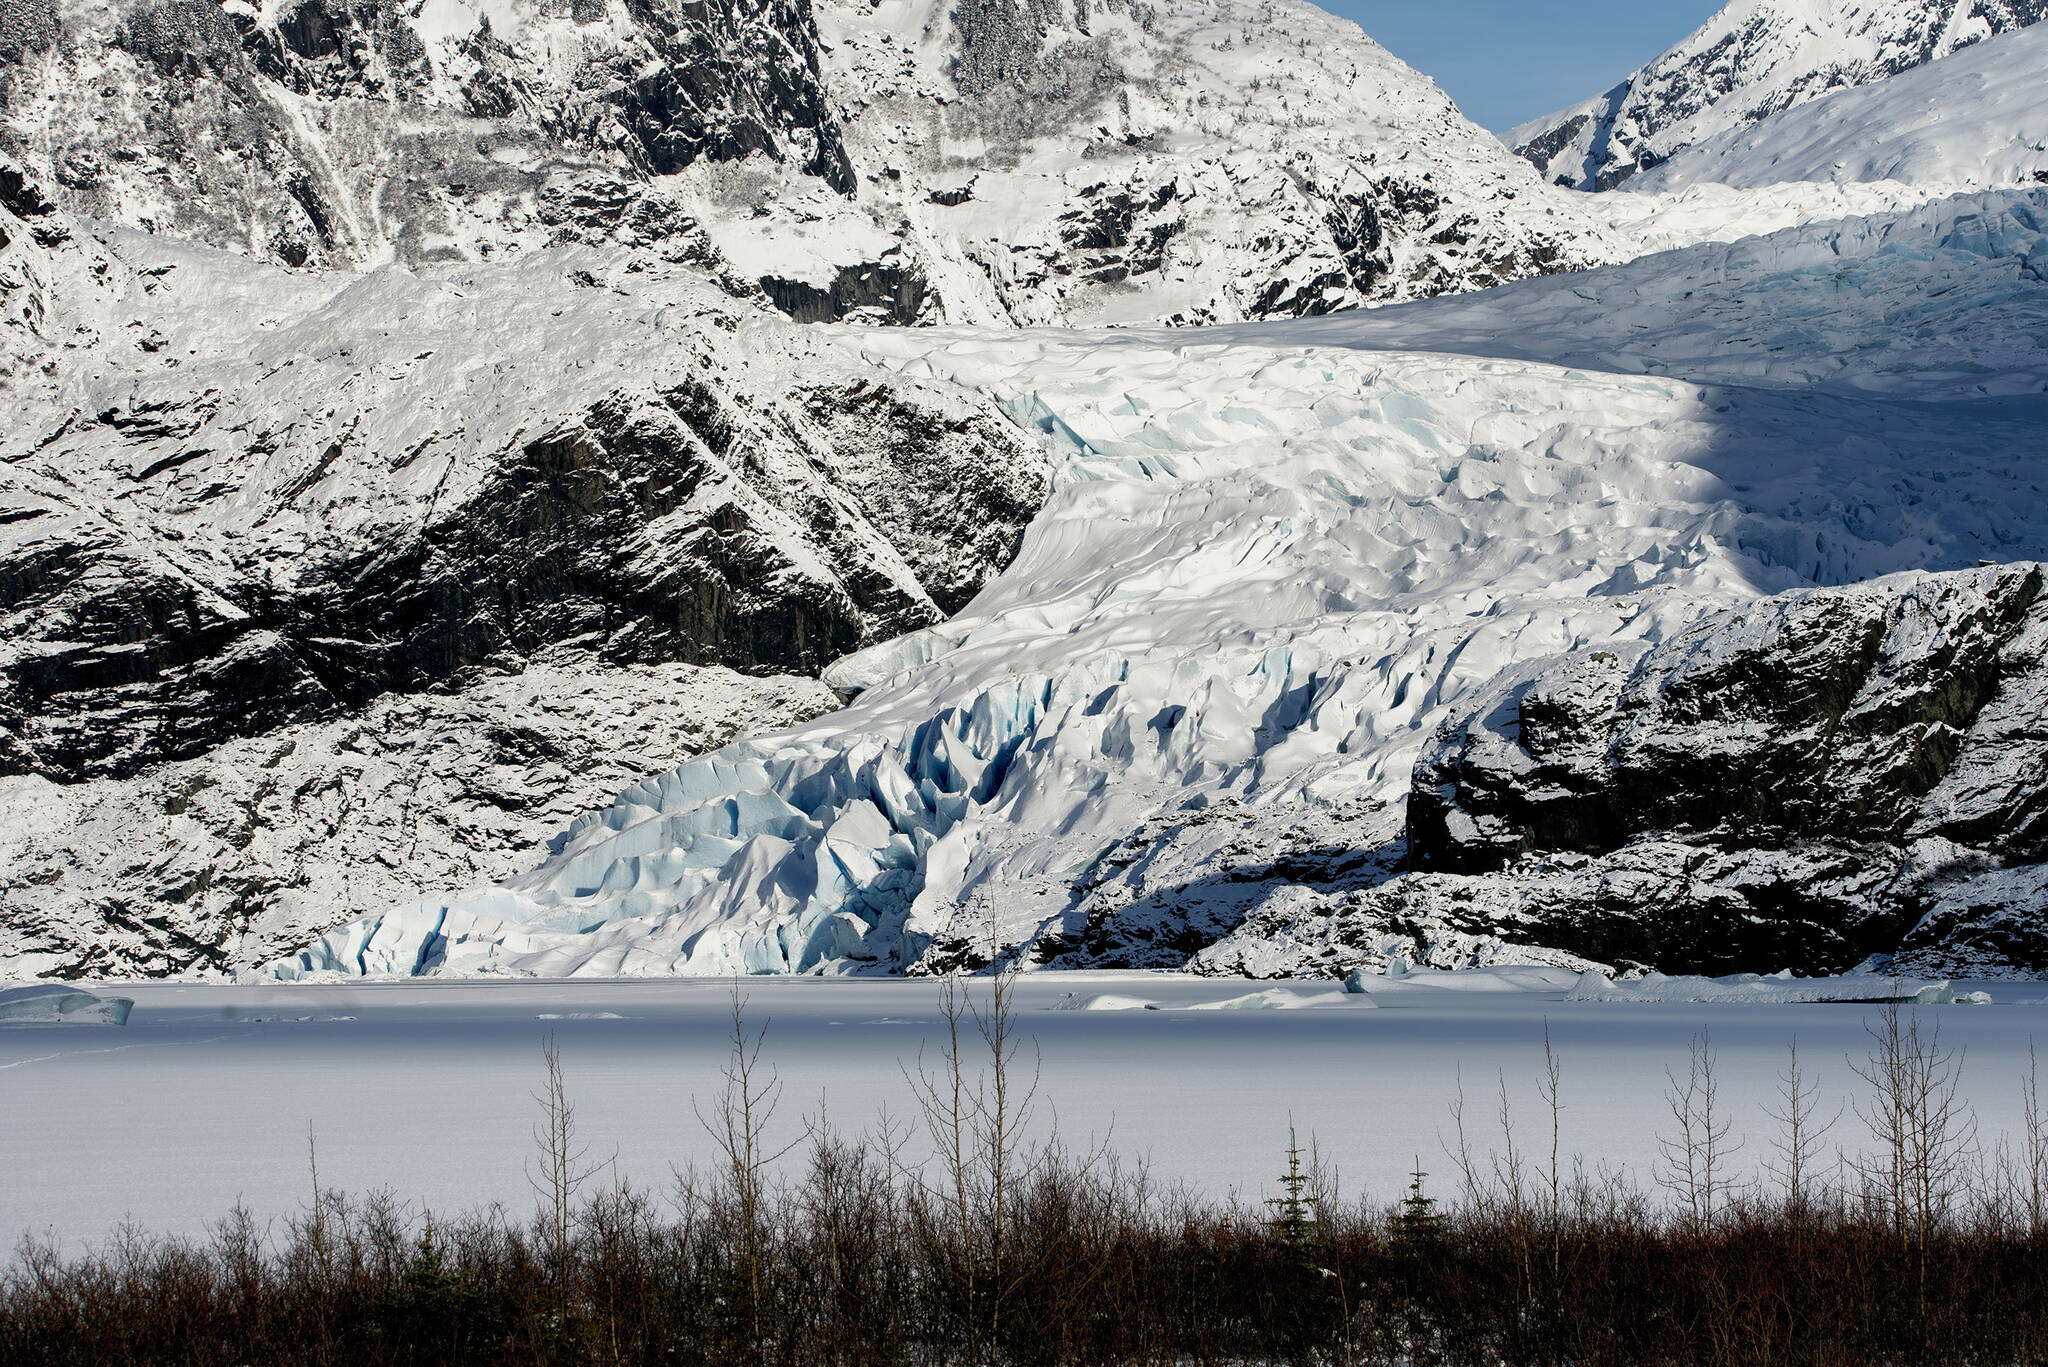 This photo shows the 2023 Face of the Mendenhall Glacier. (Courtesy Photo / Kenneth Gill, gillfoto)